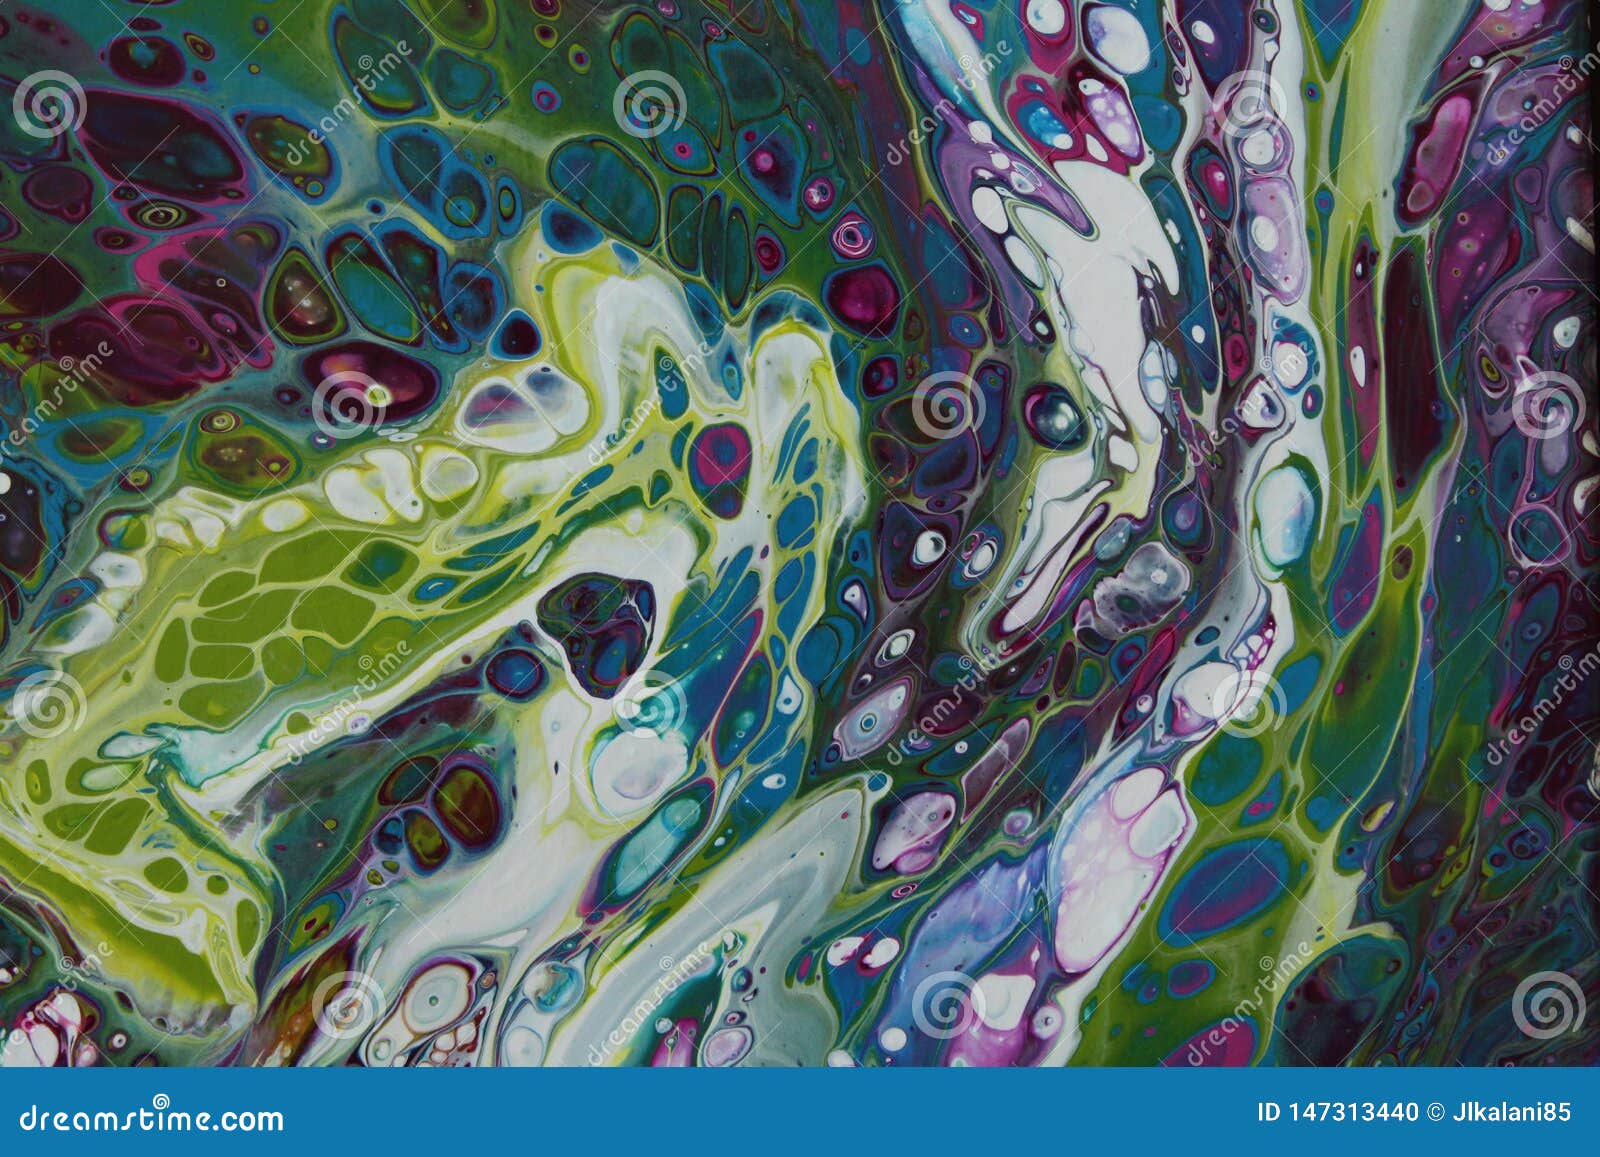 closeup of a swirling abstract acrylic pour painting with blending greens, blues, and purples.